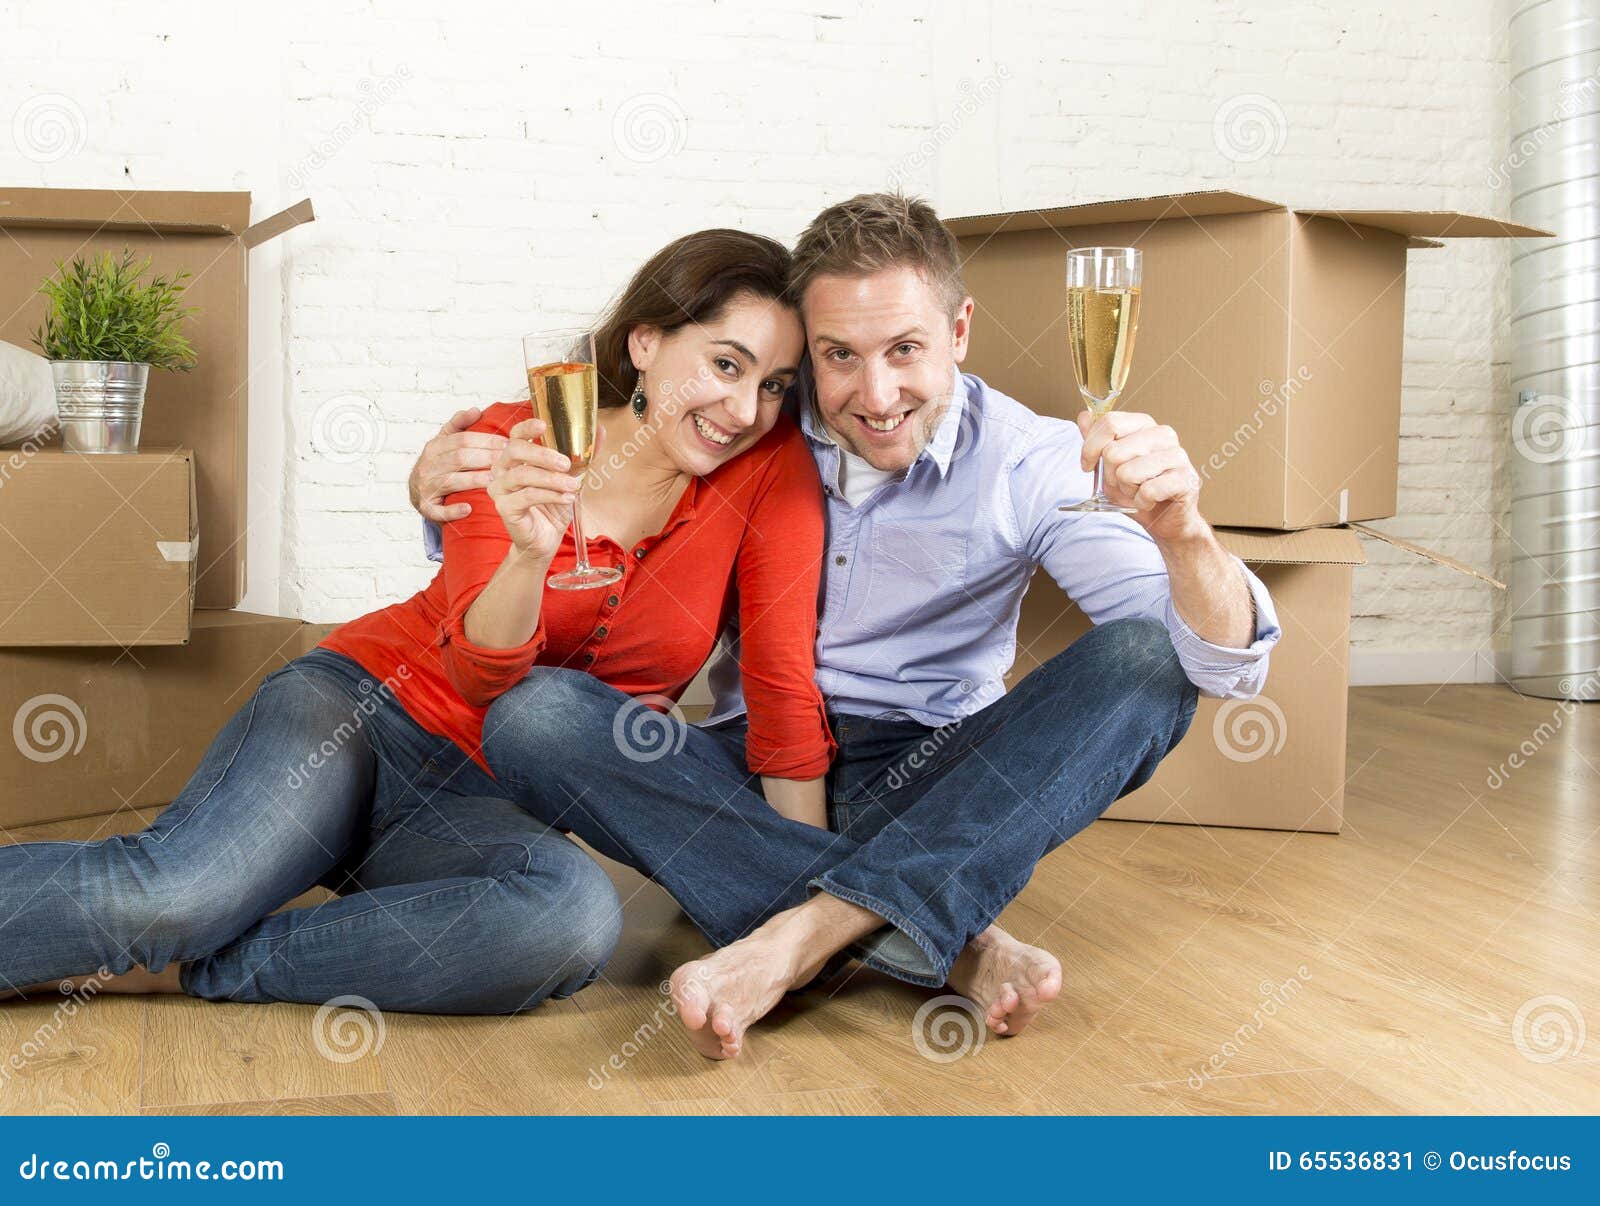 Happy American couple sitting on floor unpacking together celebrating with champagne toast moving in a new house. Young happy American couple sitting on floor unpacking boxes together celebrating with champagne toast moving in a new house or apartment in real estate and independent lifestyle concept